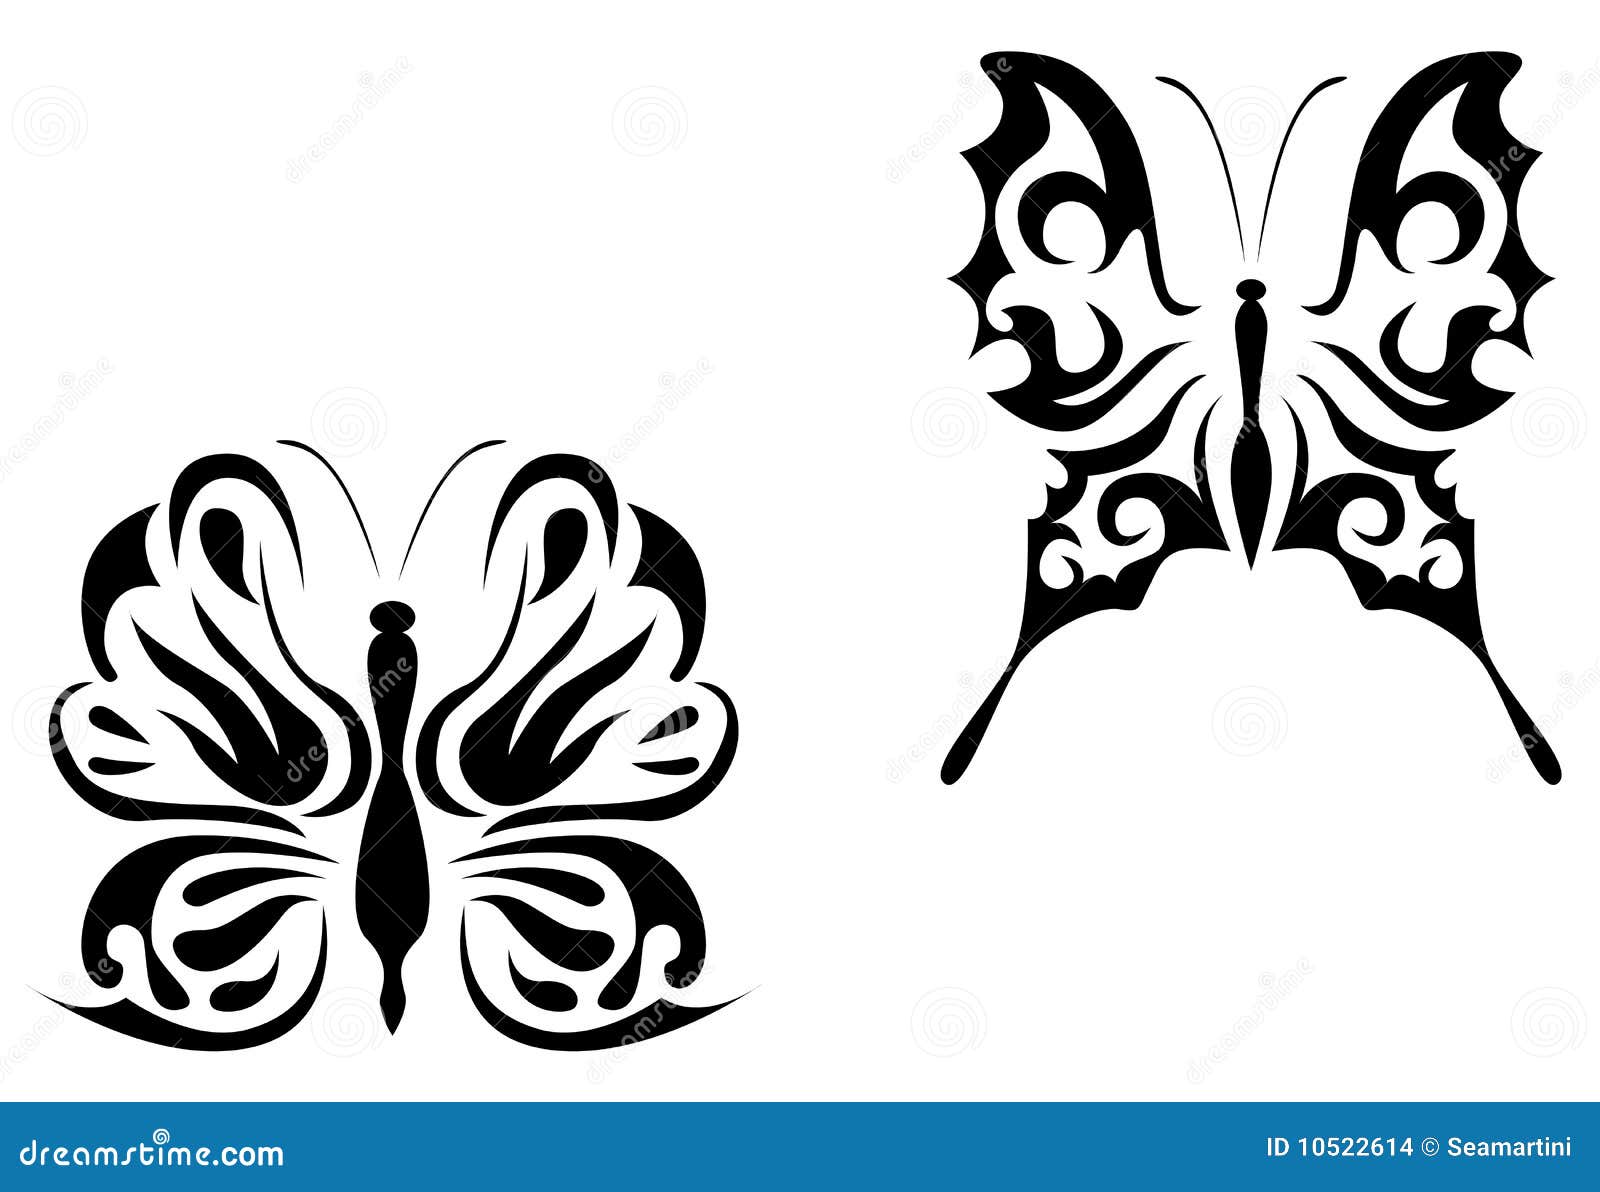 Butterfly tattoo stock vector. Illustration of abstract - 10522614